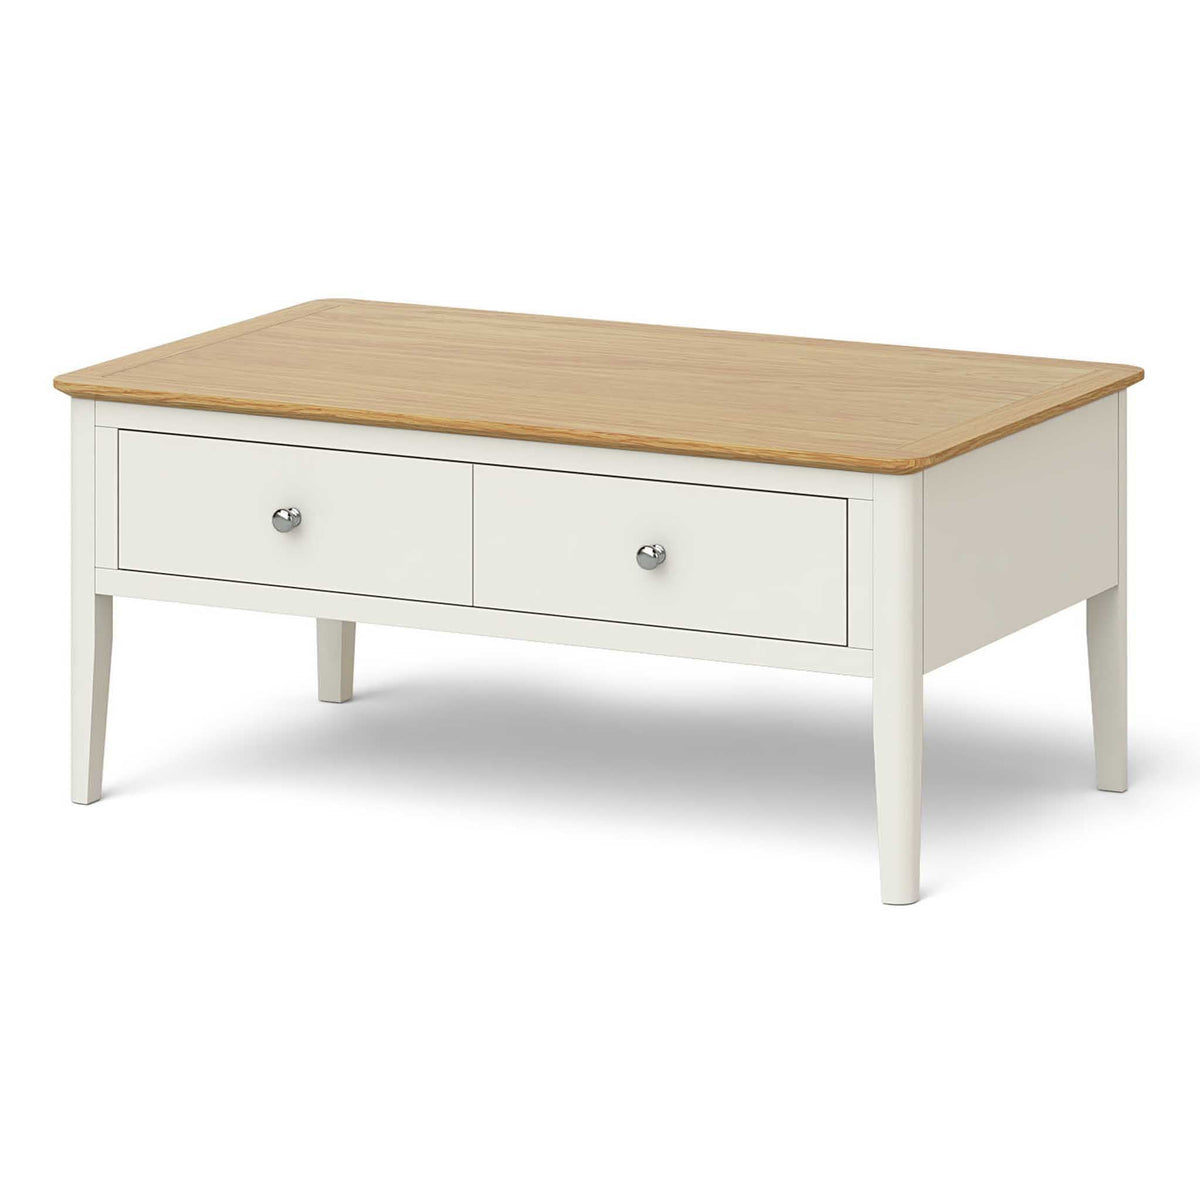 Windsor Cream Coffee Table with Storage Drawer